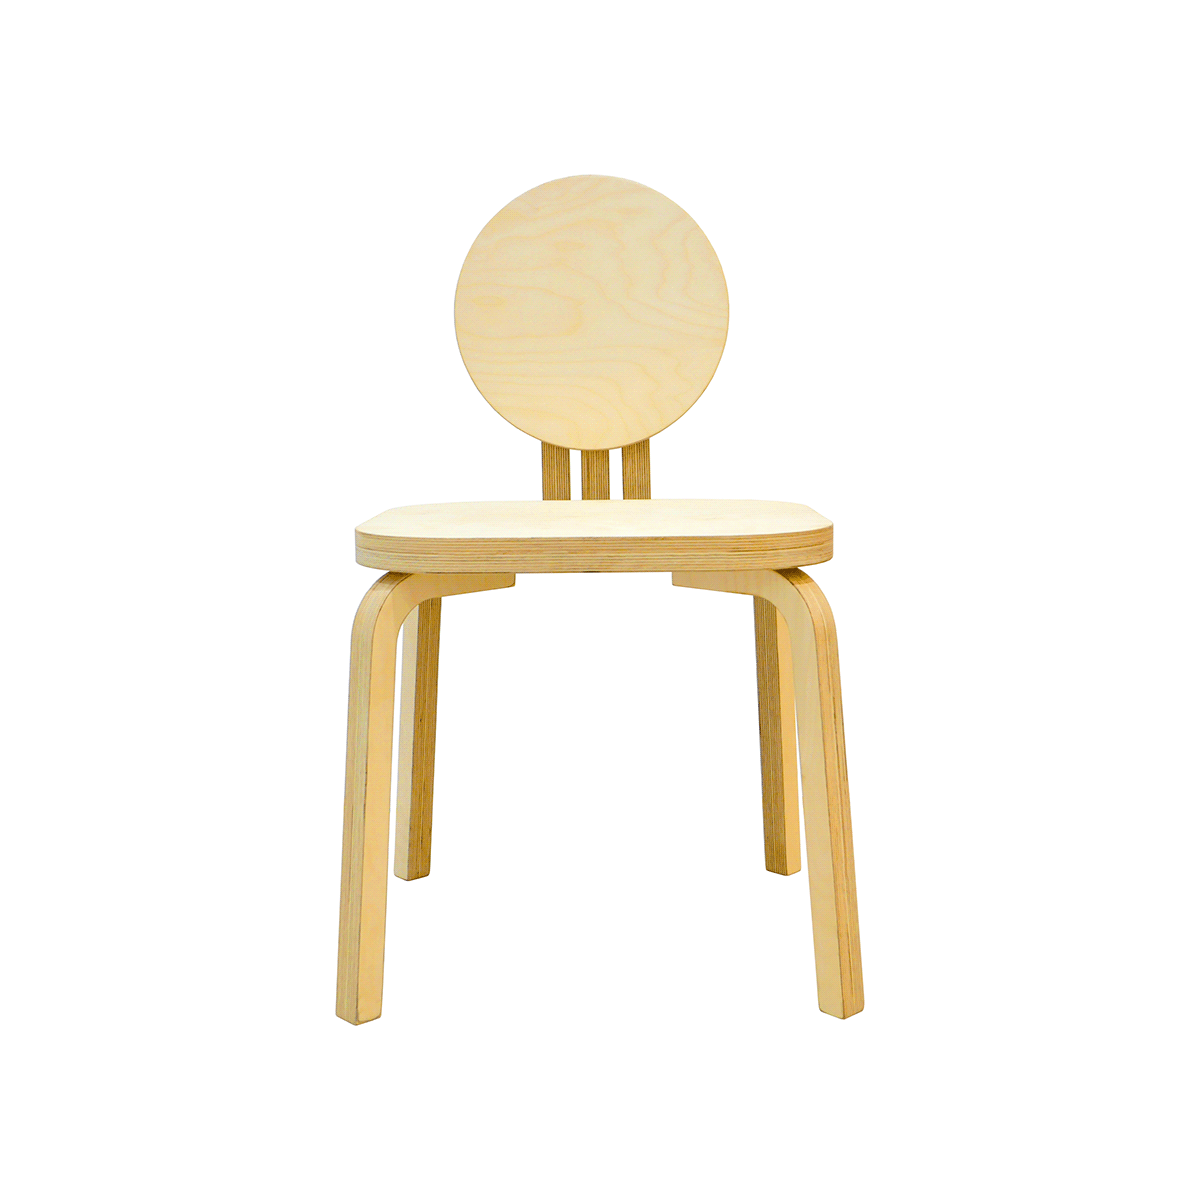 industrial design  product design  furniture chair stool concept wood interior design  chastool chastool60